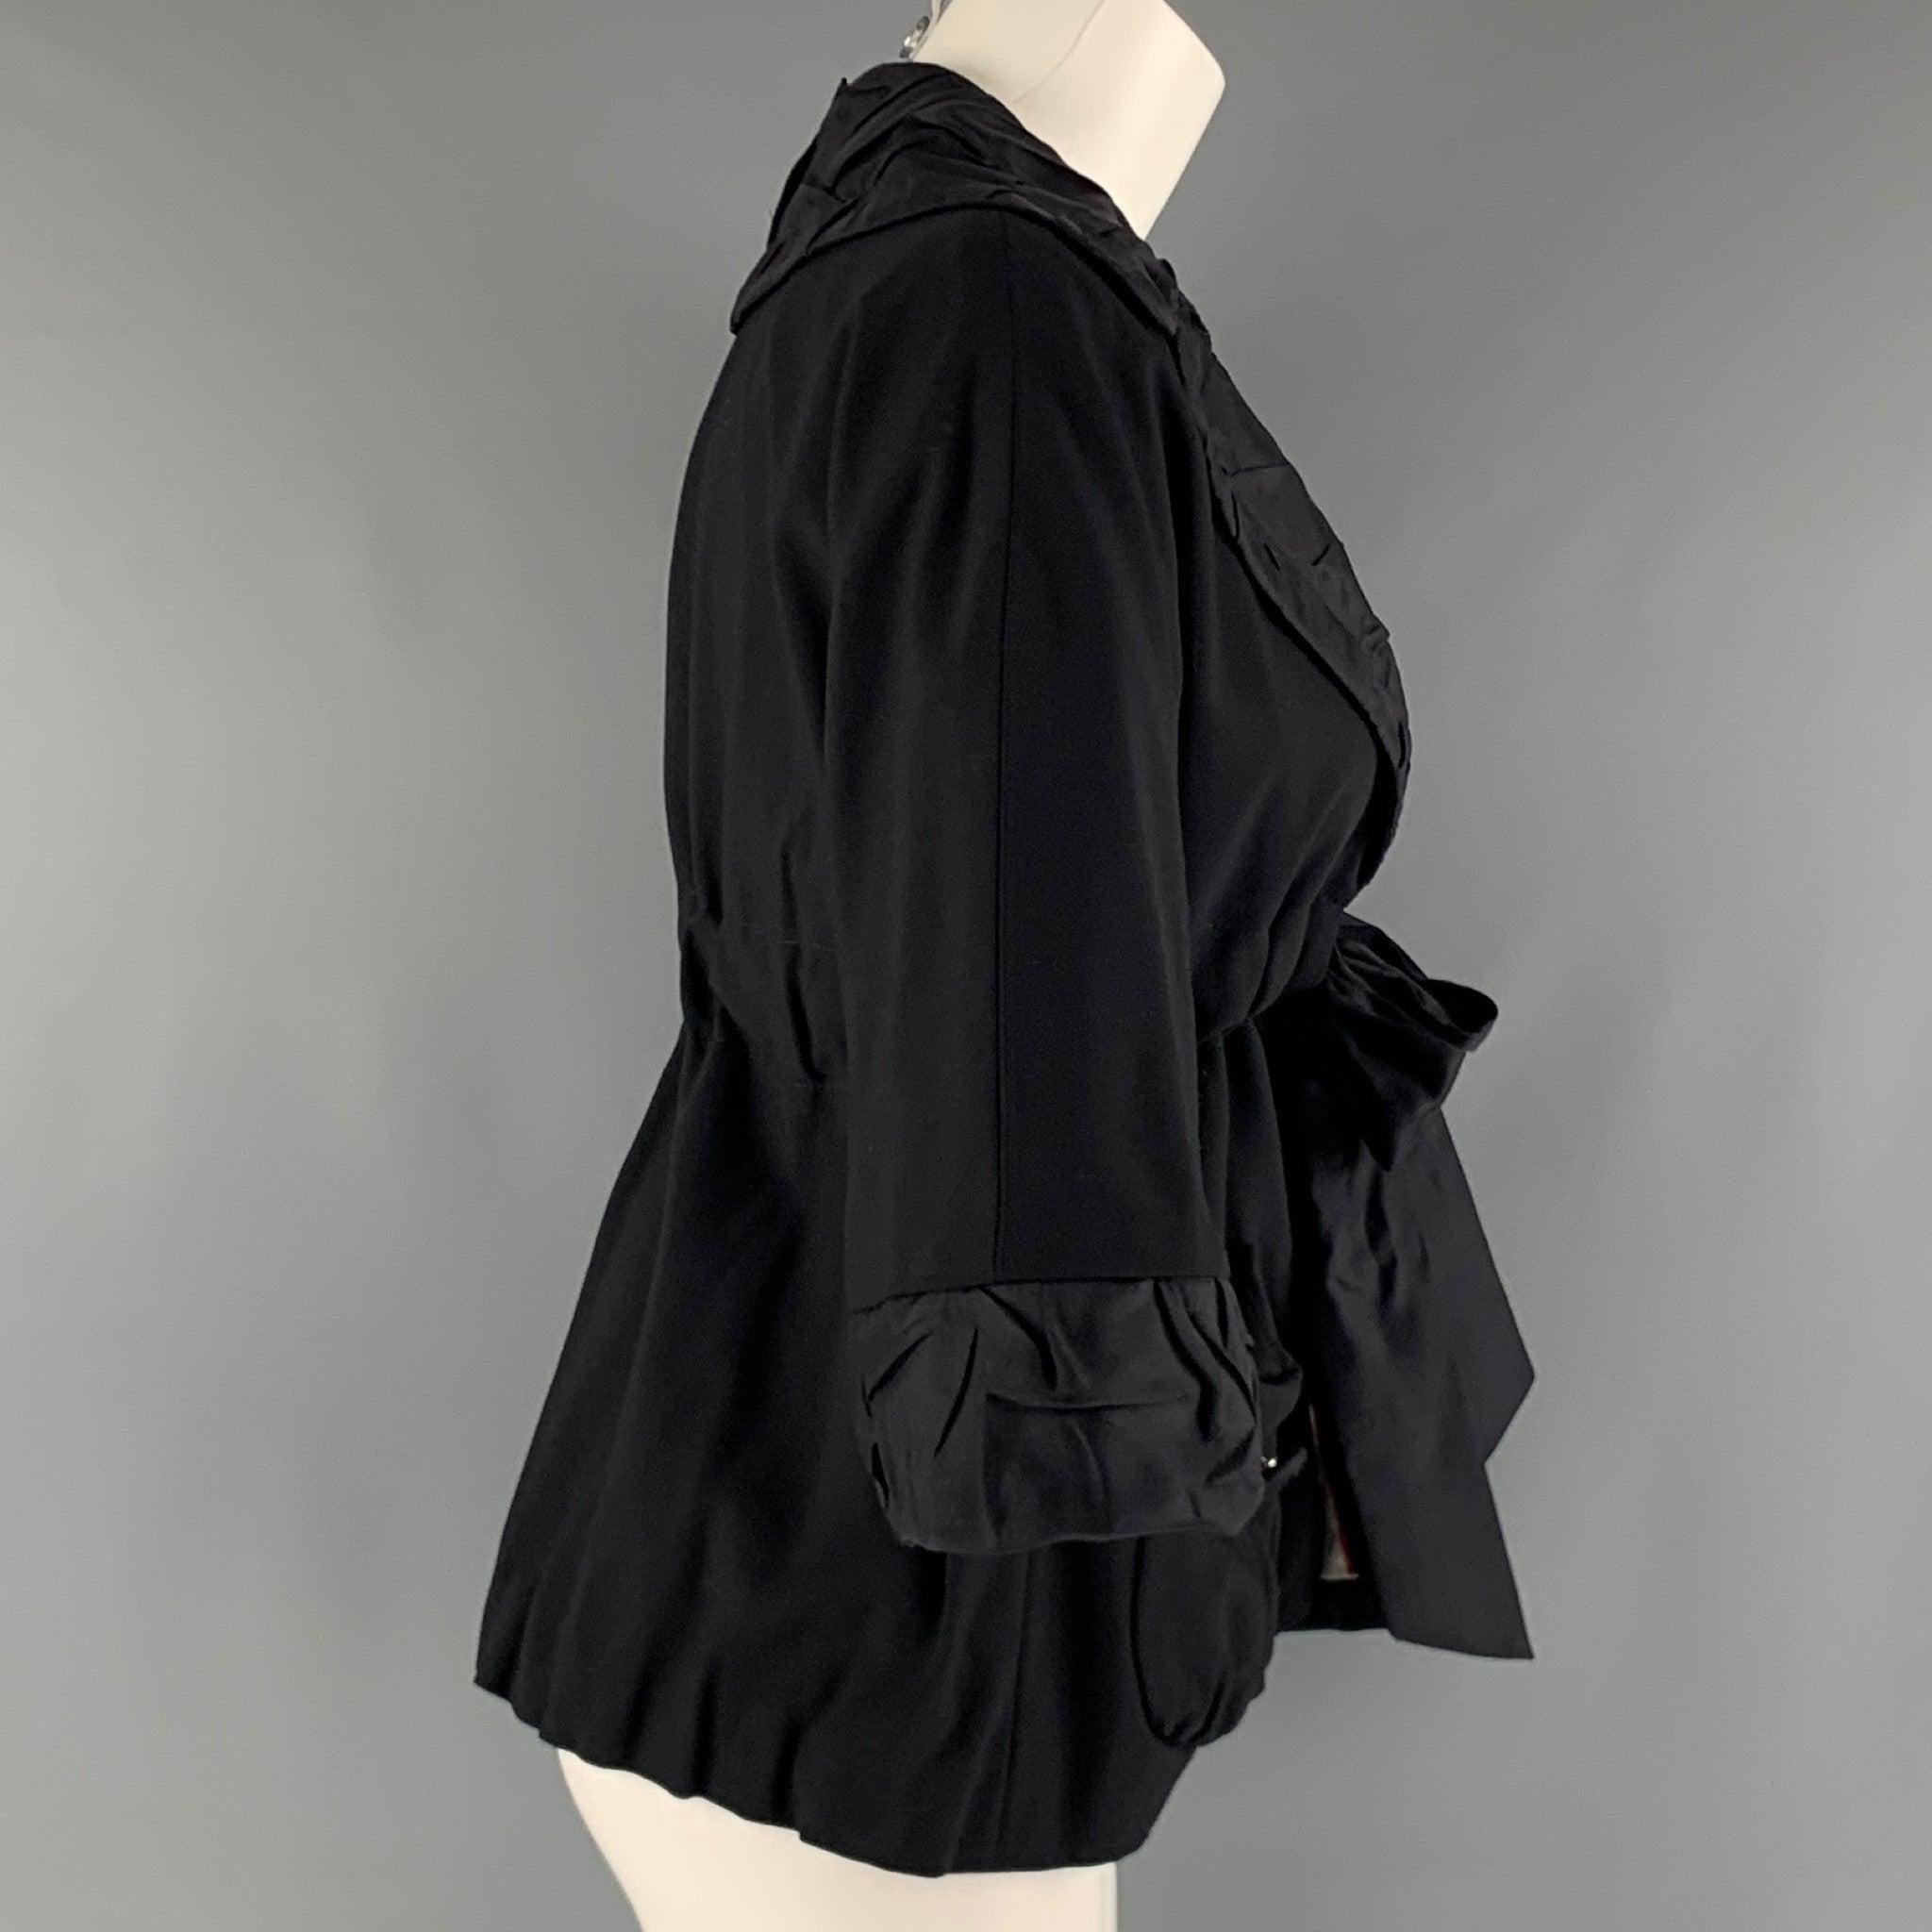 MARC by MARC JACOBS jacket comes in a black viscose blend woven material featuring a notch textured collar, 3/4 sleeves, patch pockets at front, and a ribbon tie closure. Excellent Pre-Owned Condition. 

Marked:   2 

Measurements: 
 
Shoulder: 16